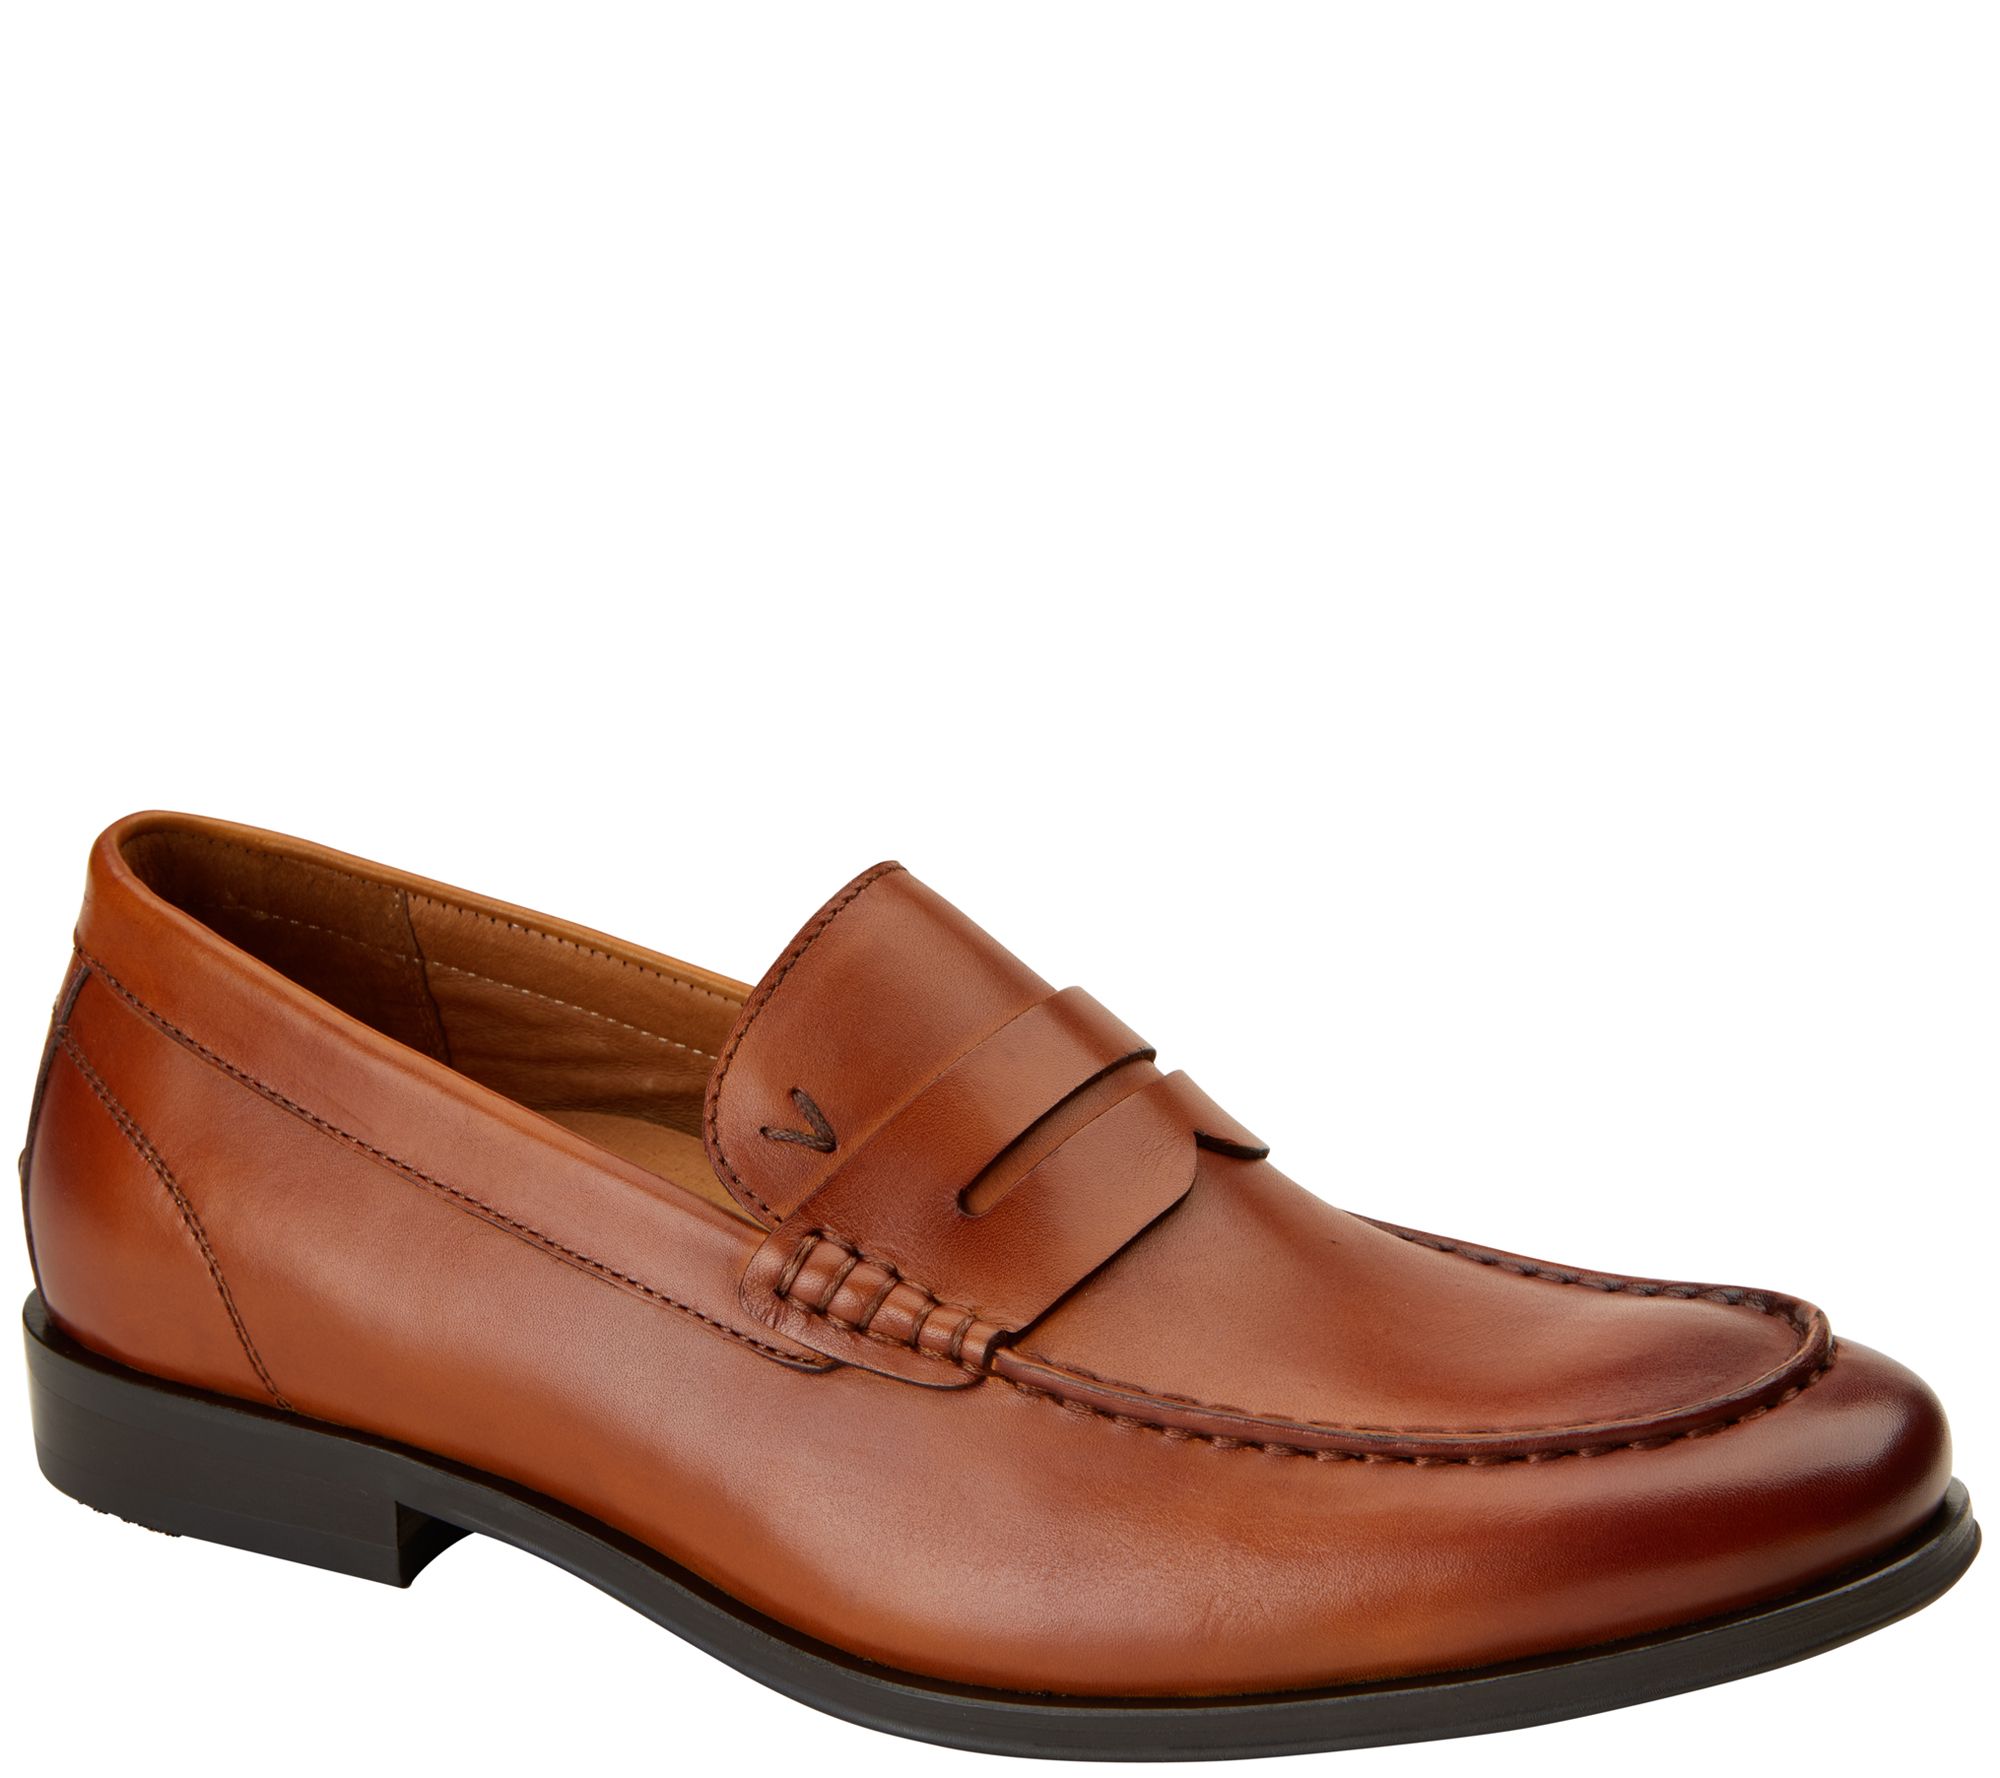 Vionic Men's Leather Loafers - Spruce Snyder - QVC.com